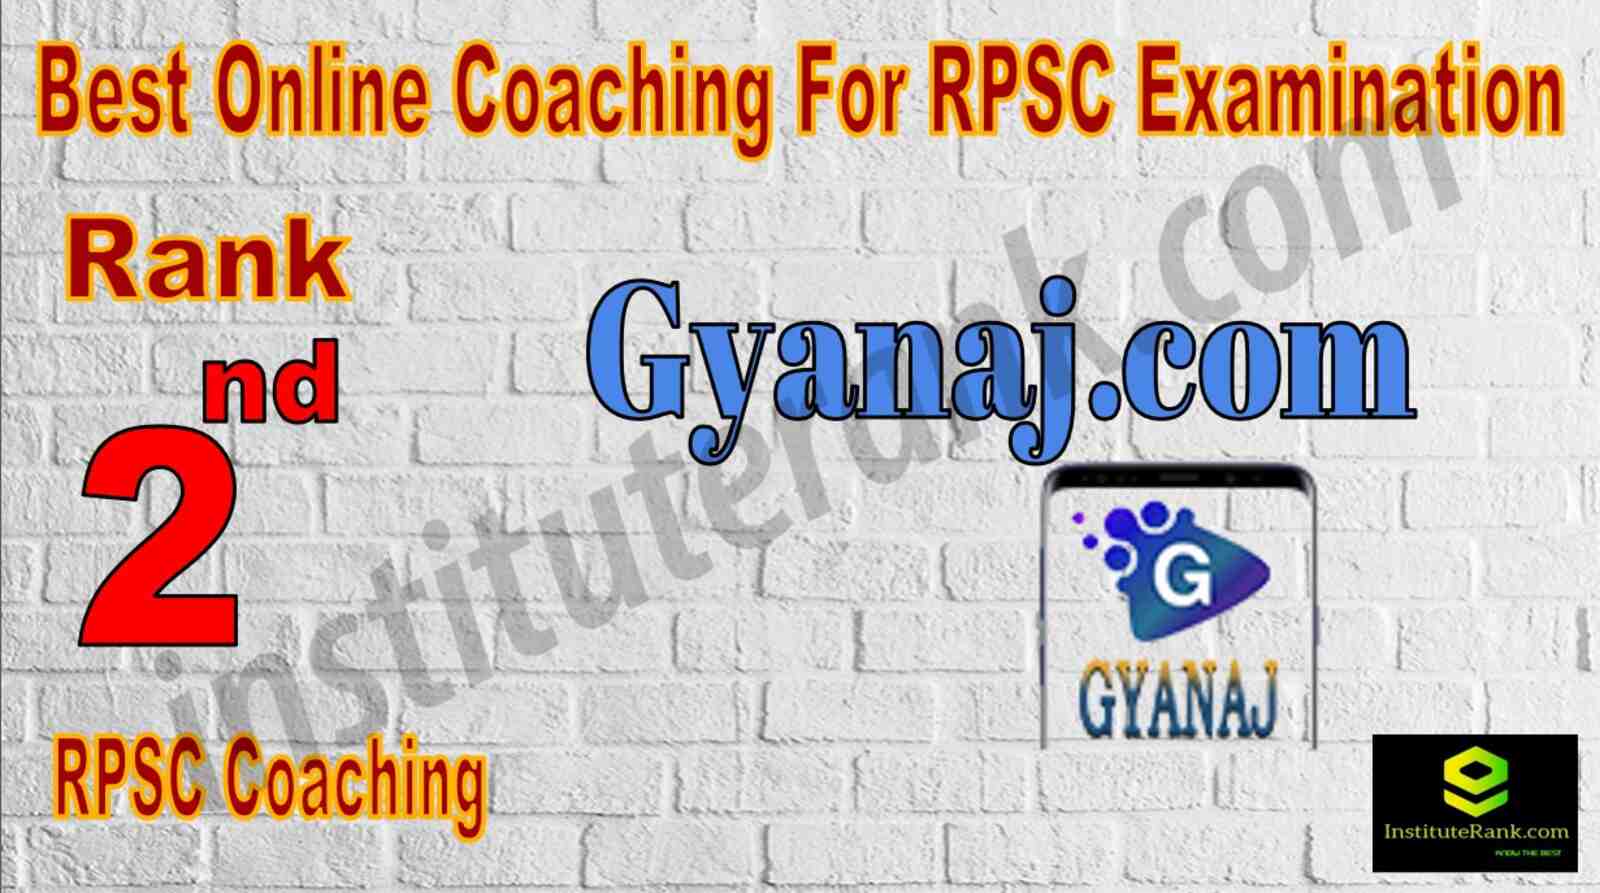 Rank 2. Best Online Coaching Centre for the RPSC Examination